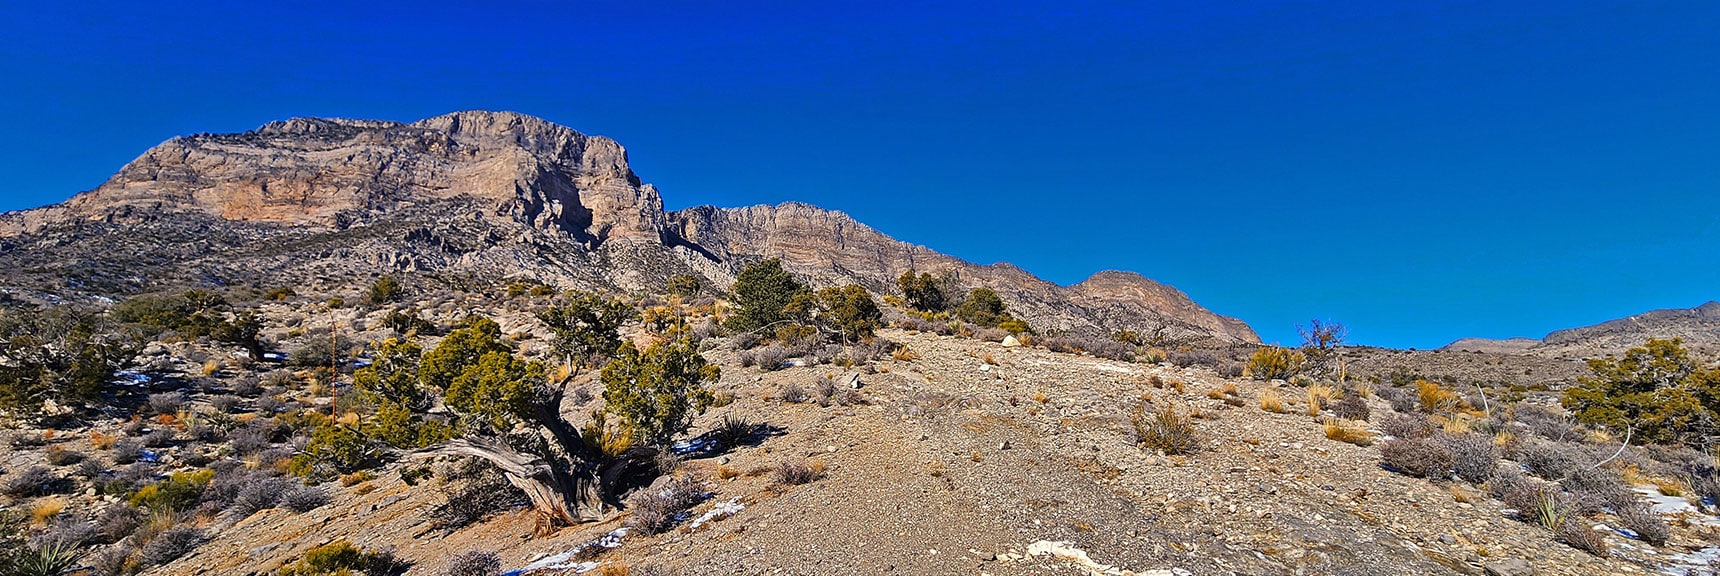 Will Take a Steep Detour Up to Brownstone Trail Summit. | 3 Basin Circuit | Calico Basin, Brownstone Basin, Red Rock Canyon, Nevada